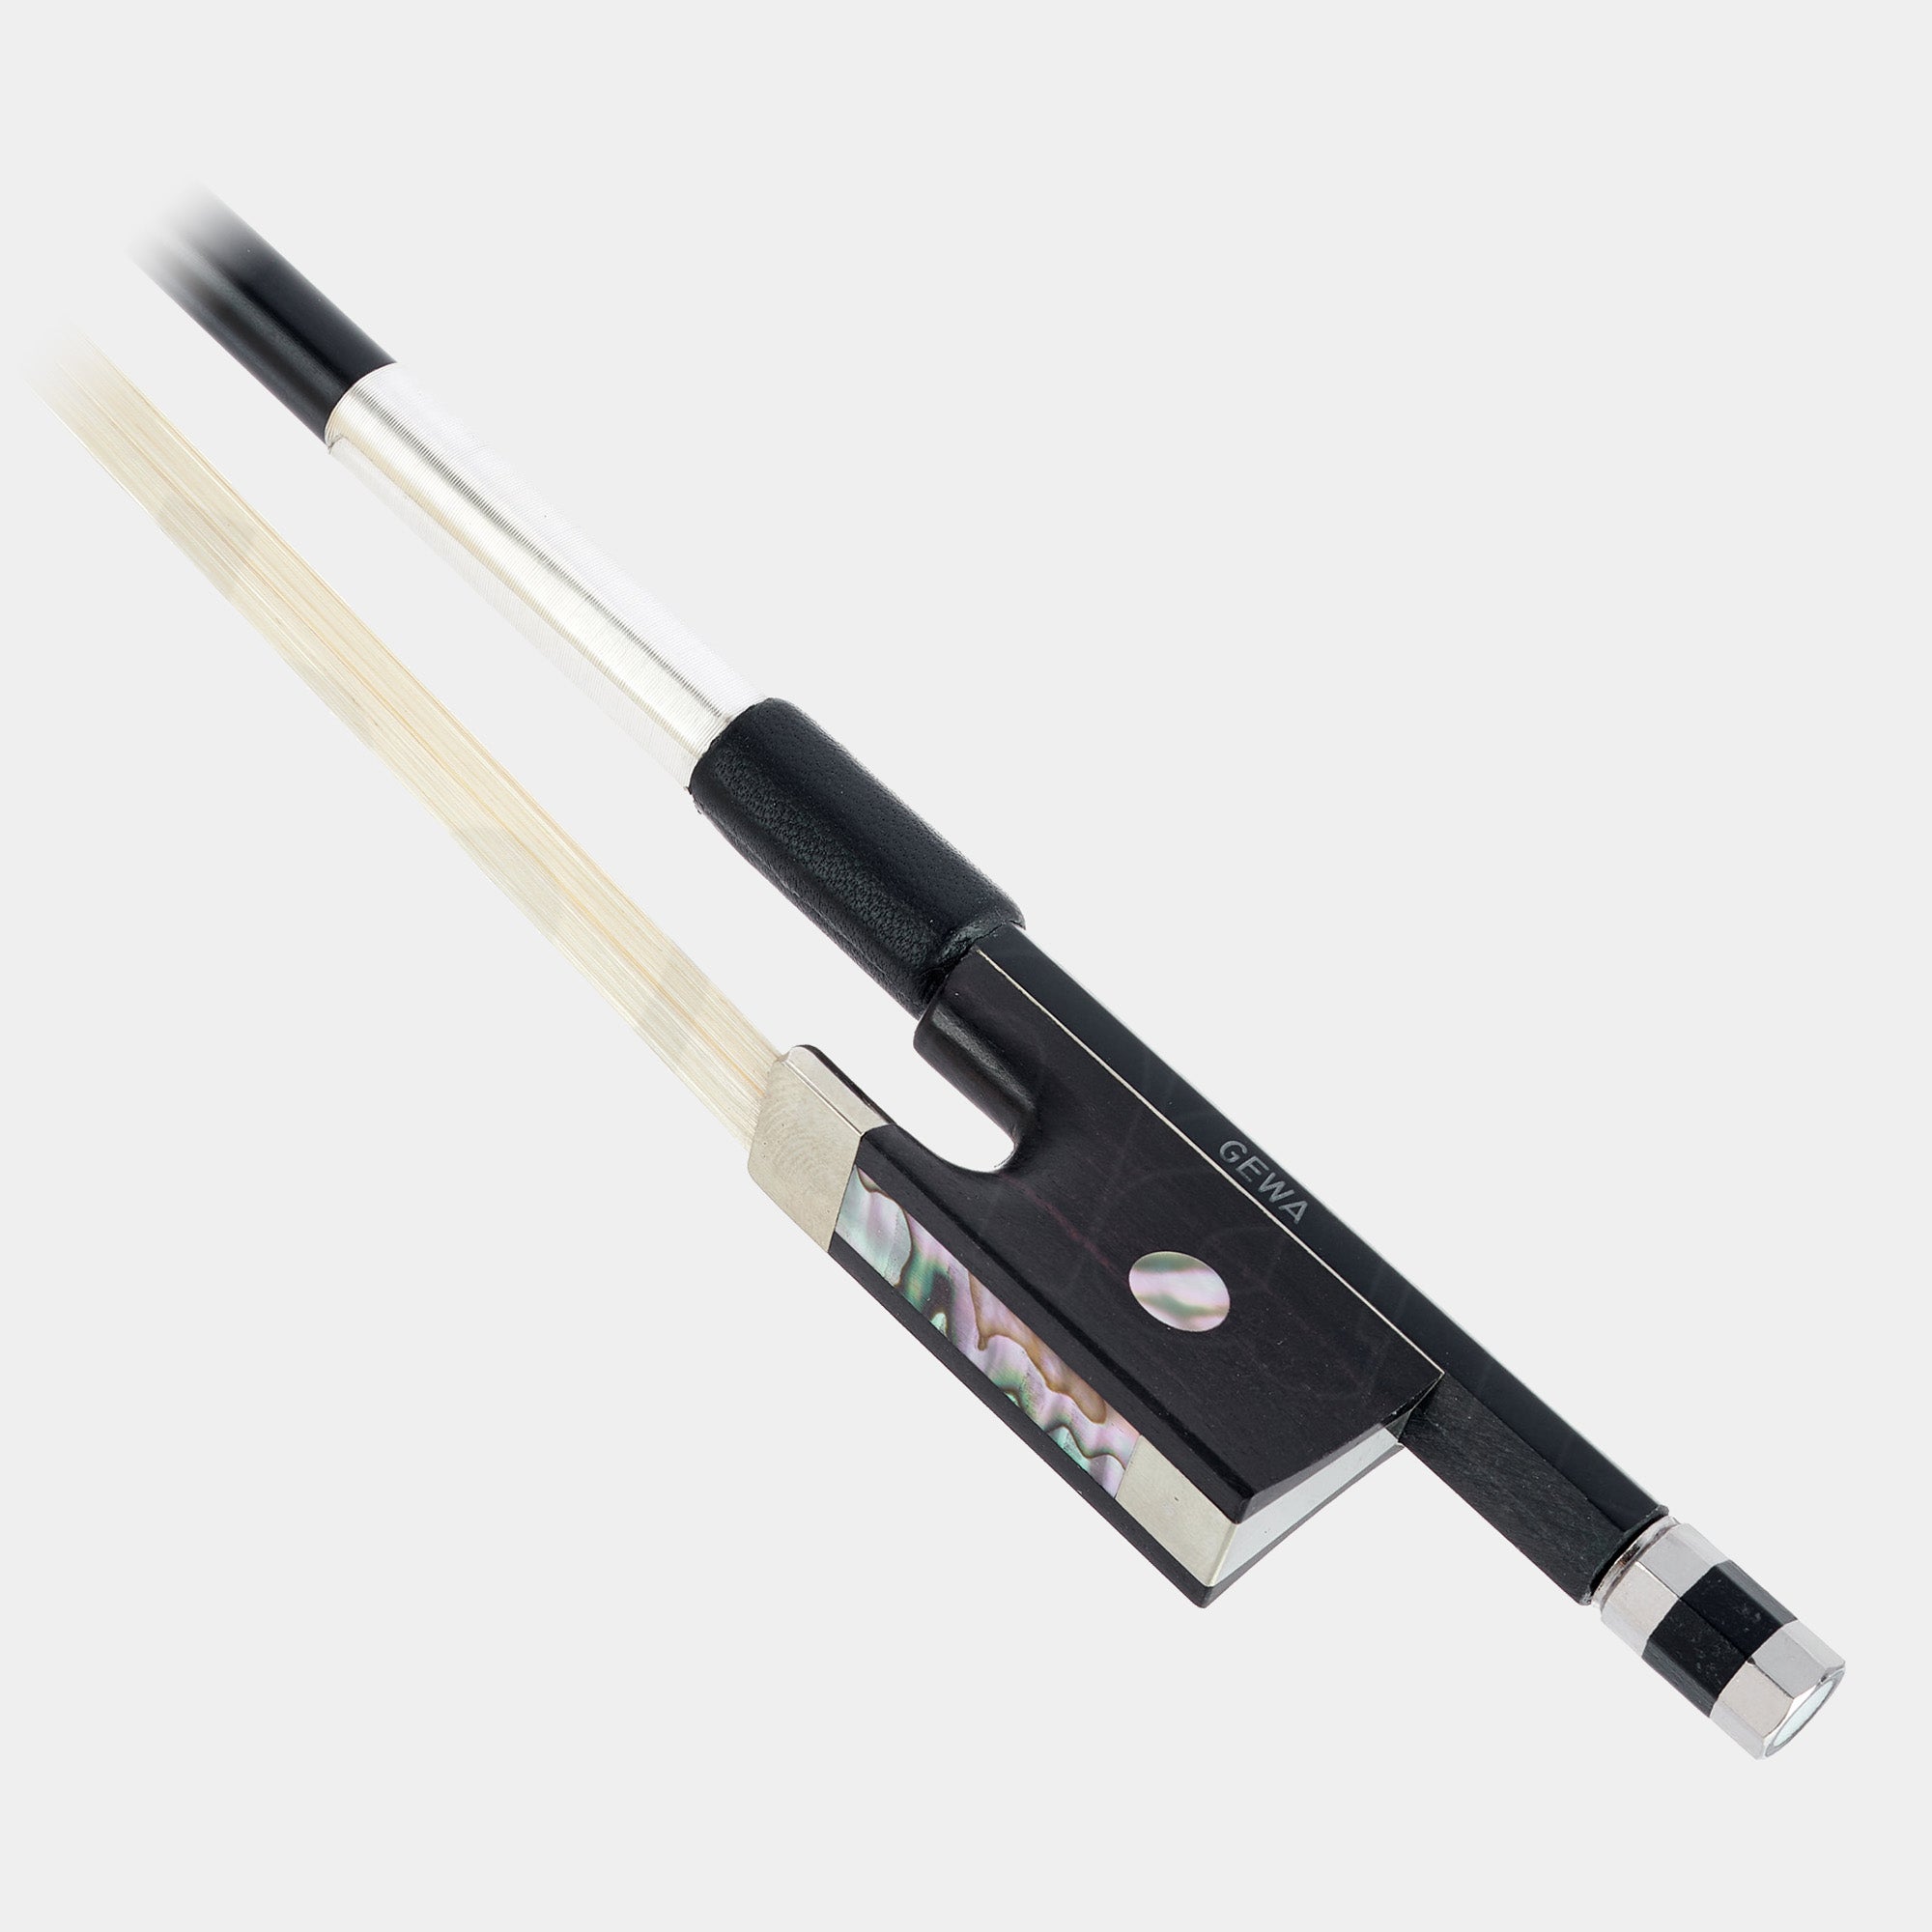 Carbon Student Violin Bow